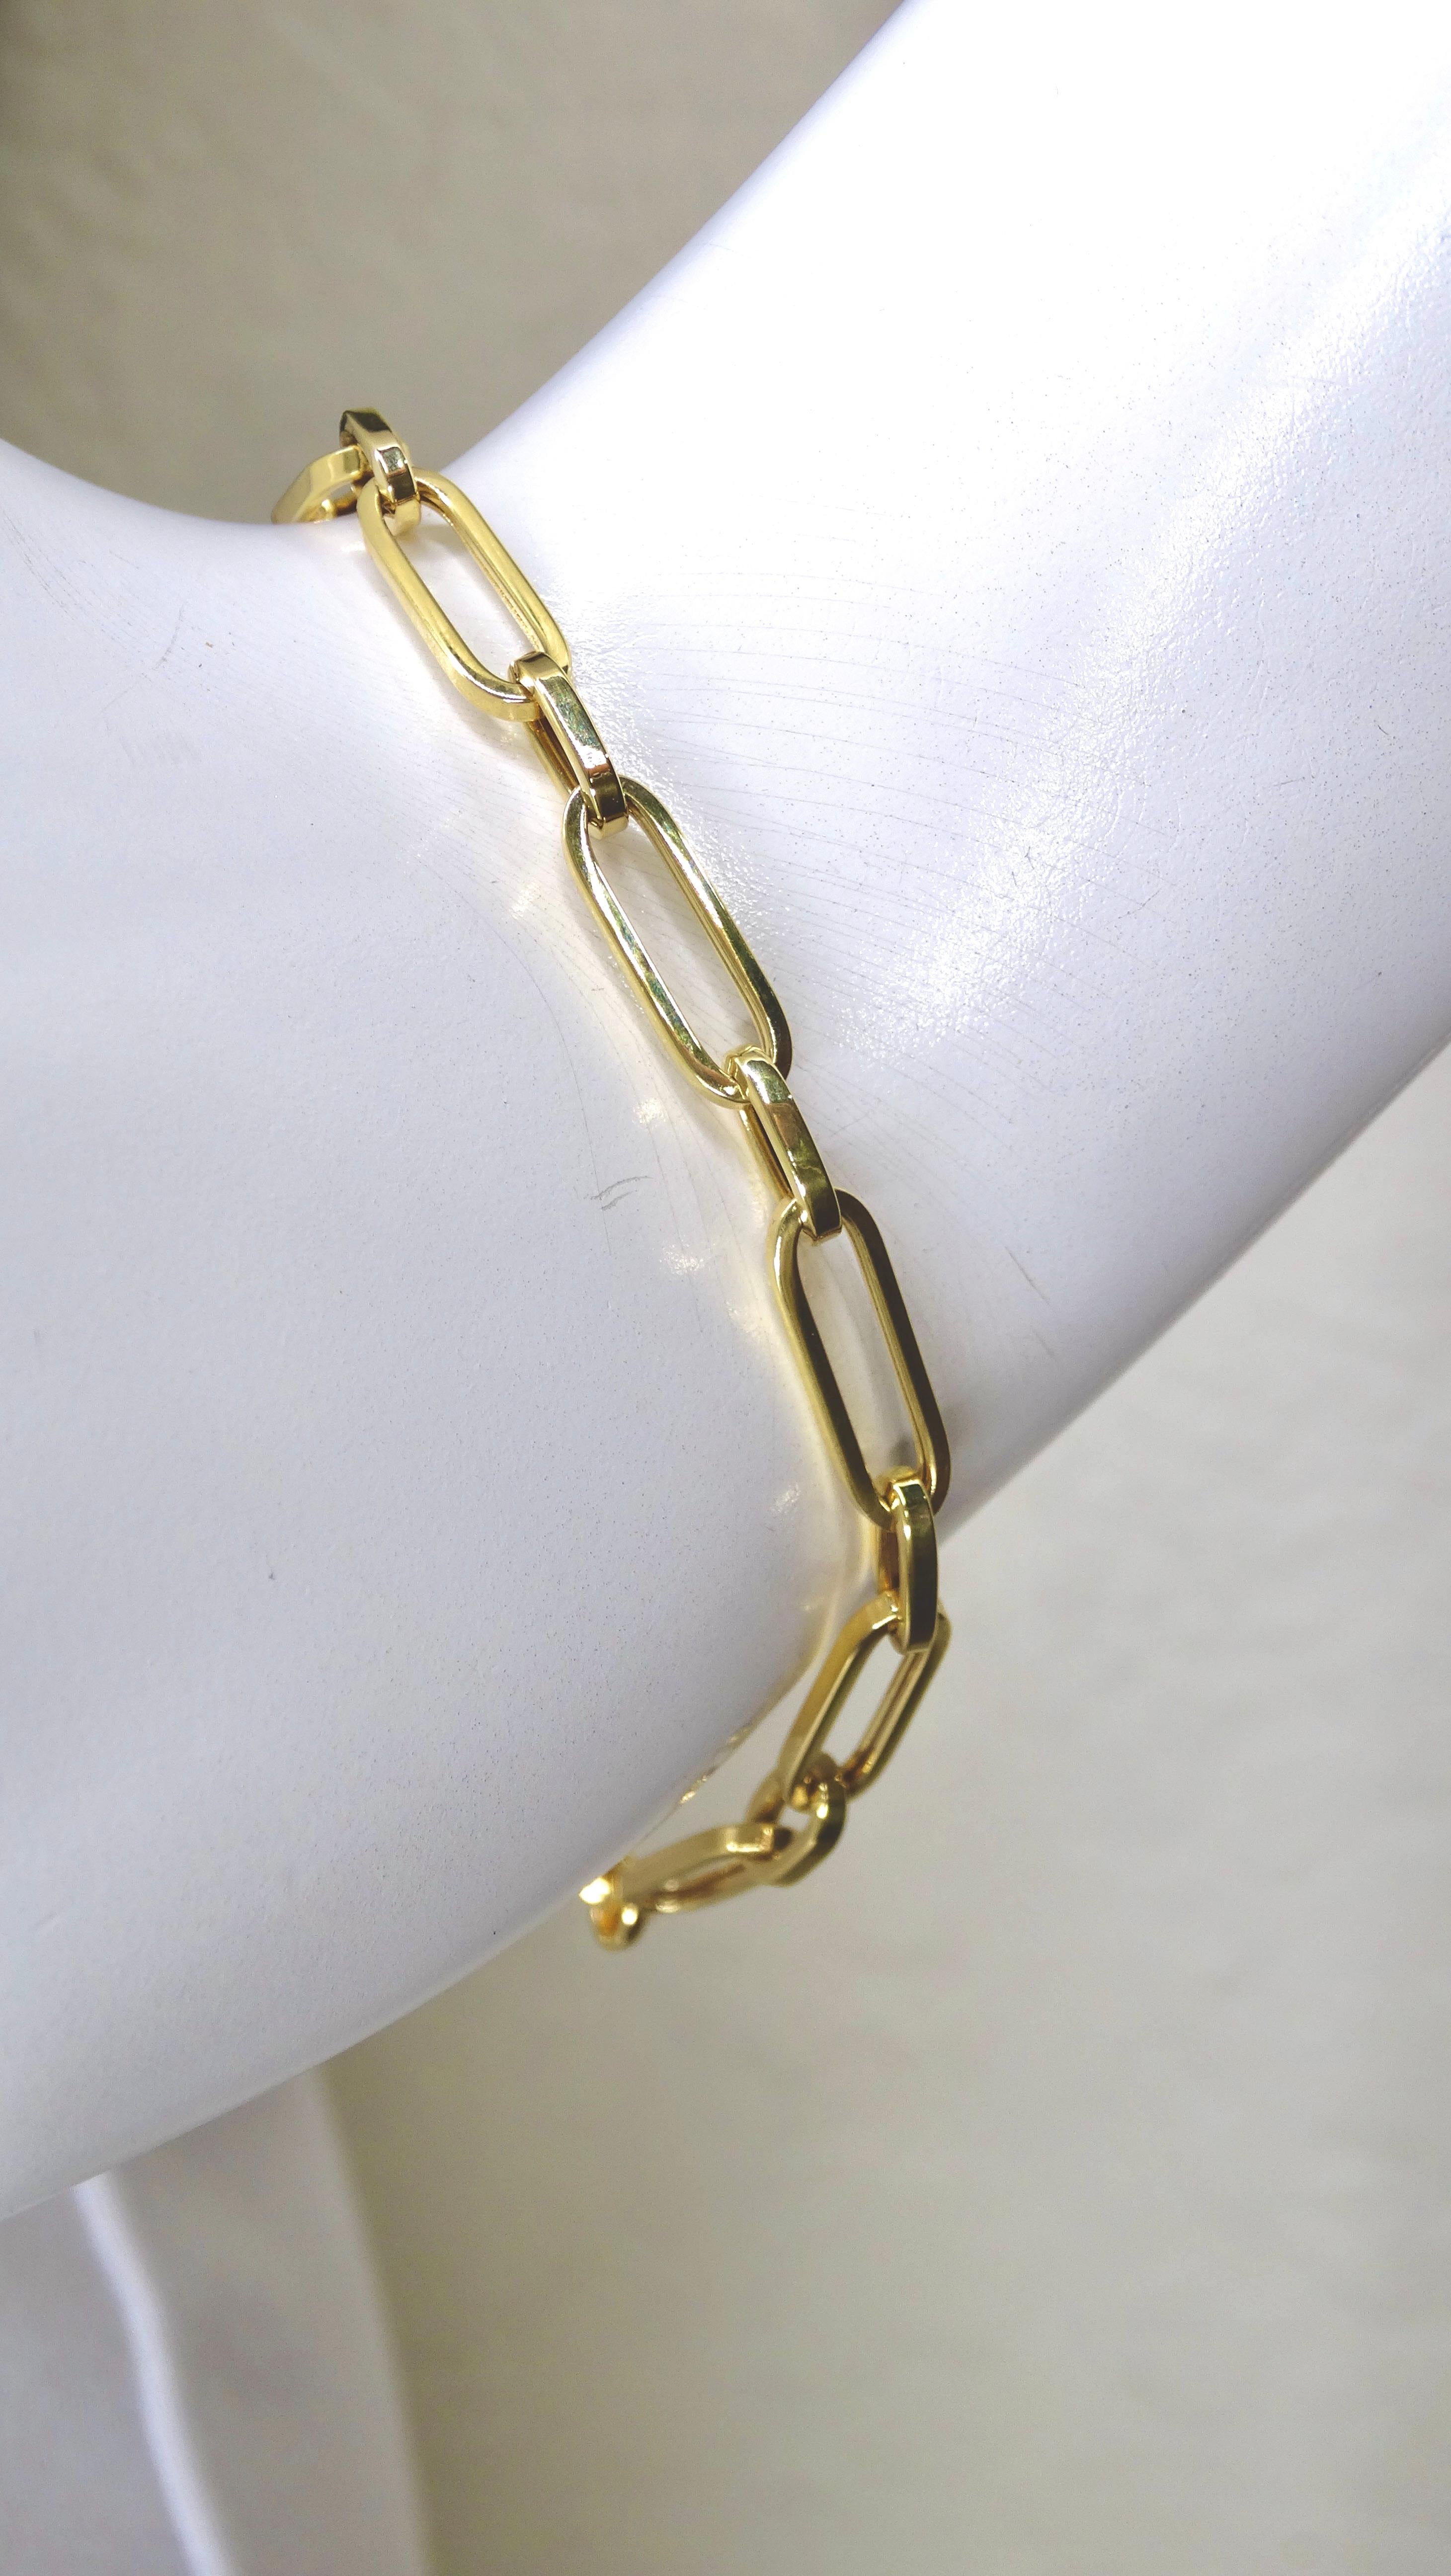 This dainty bracelet can be taken with you everyday because of its elegant design. You can't go wrong with this 14k gold link bracelet! It can be easily dressed up or down with the switch of an outfit. It would look fabulous layered with other gold